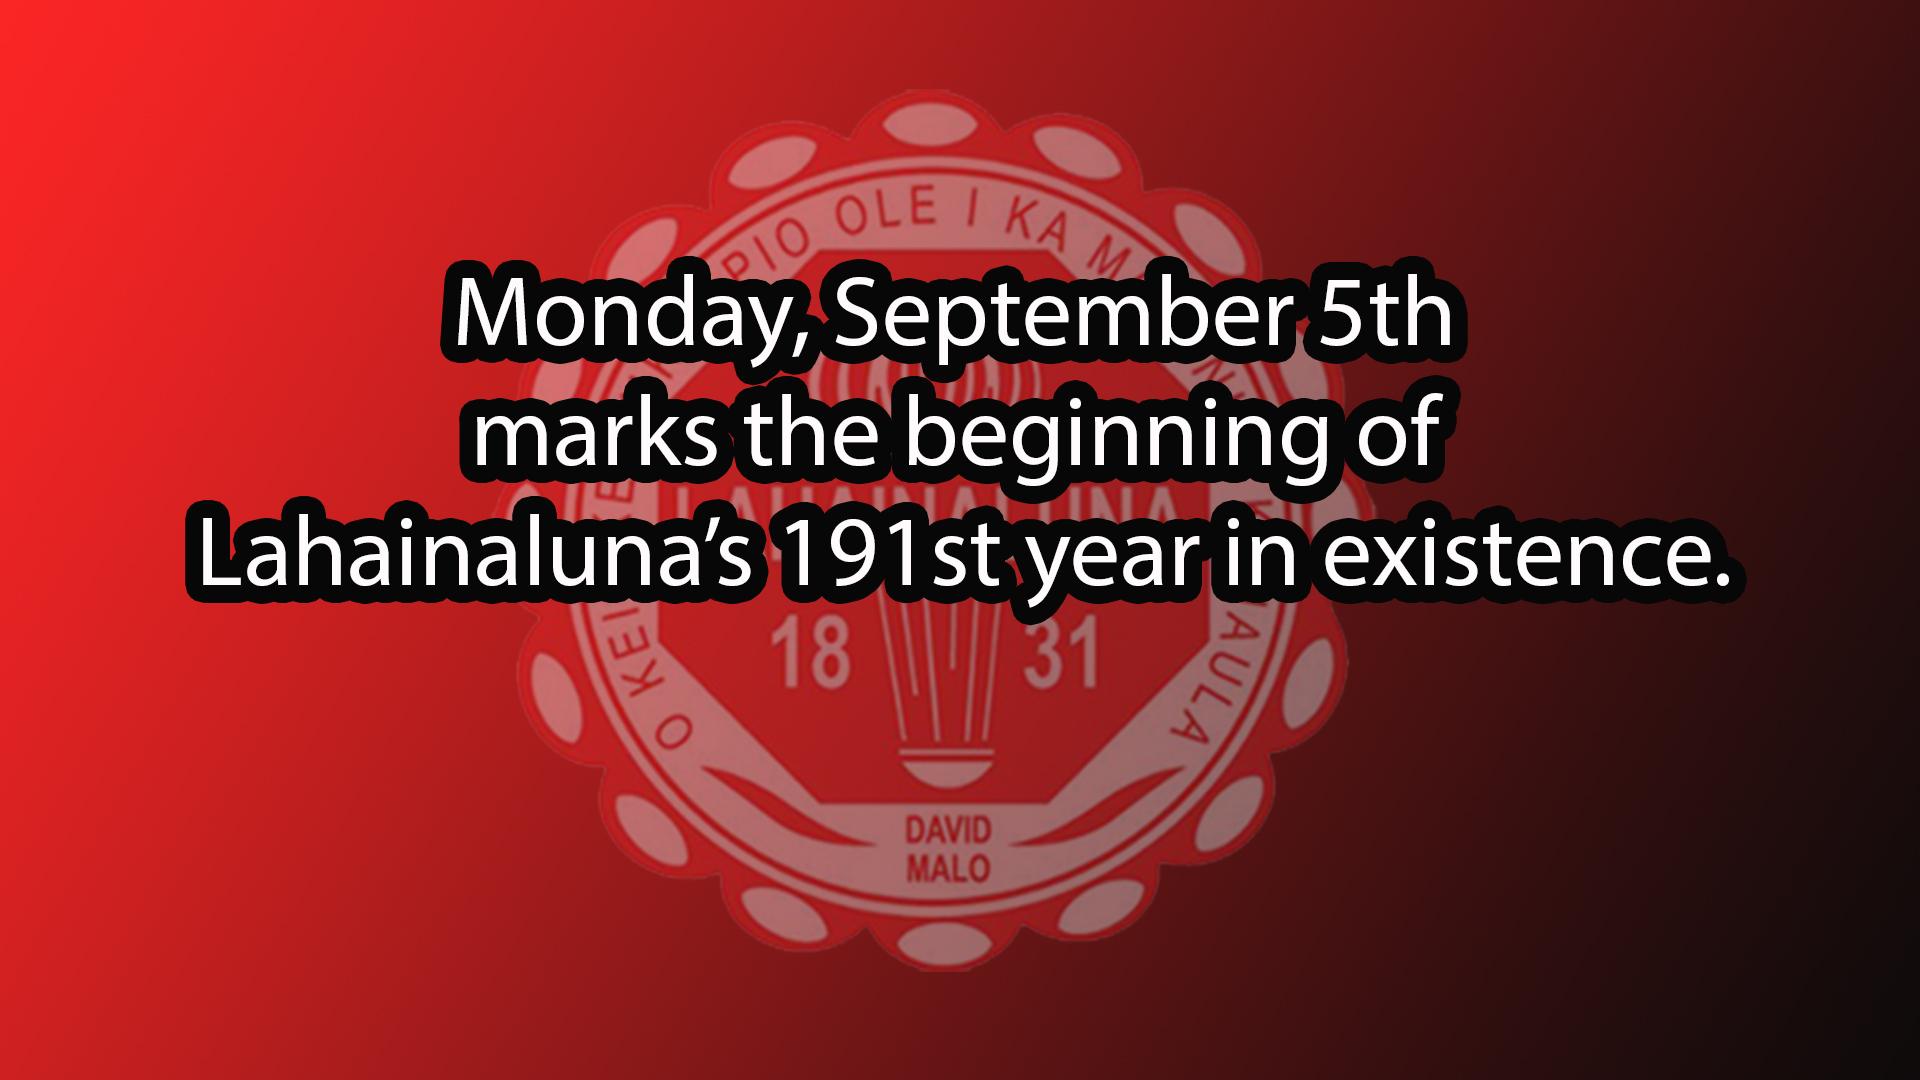 Monday, September 5th marks the beginning of Lahainaluna’s 191st year in existence.